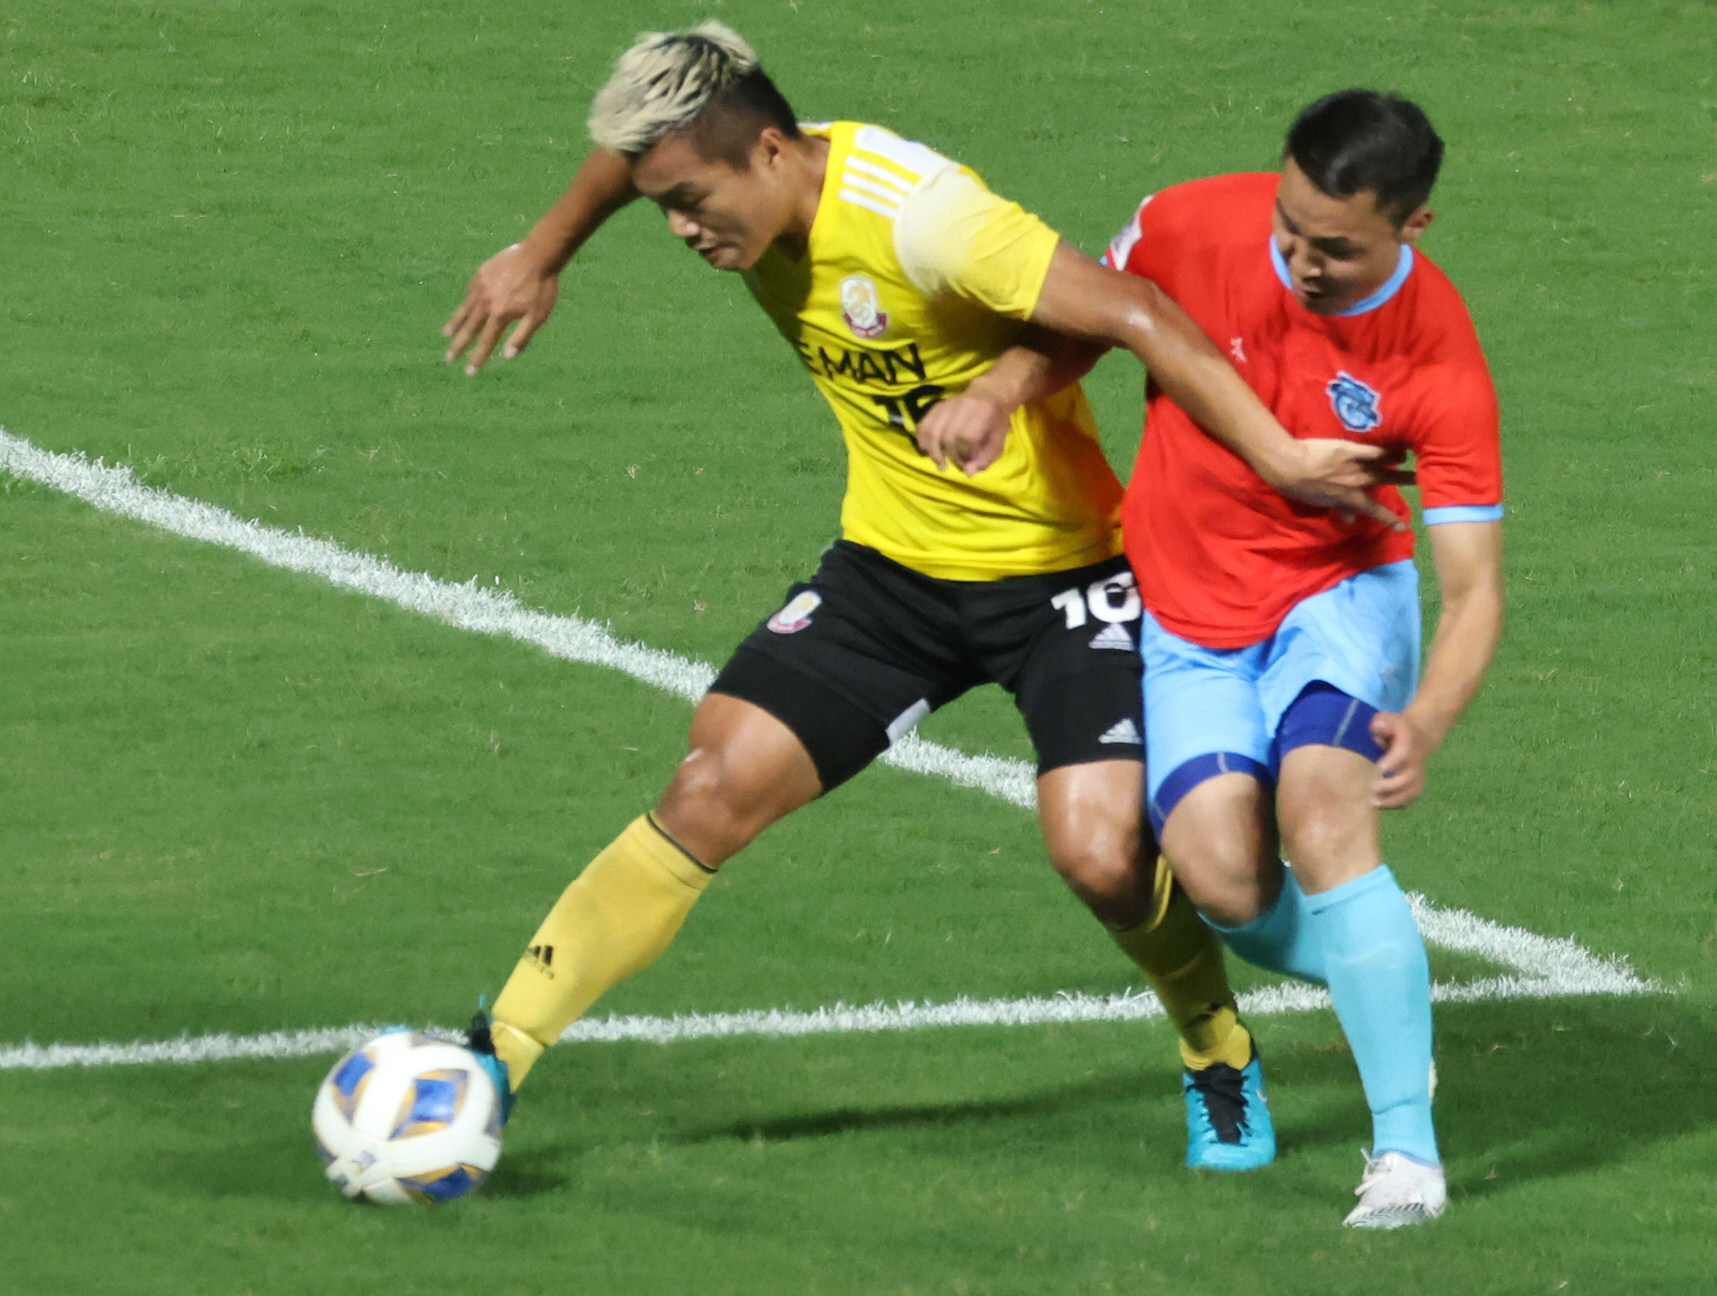 Ngan Lok-fung (yellow) of Lee Man attempts to get away from Athletic 220’s Enkhbileg Purevdorj in last year’s AFC Cup group match at Tseung Kwan O Sports Ground.  Photo: K. Y. Cheng